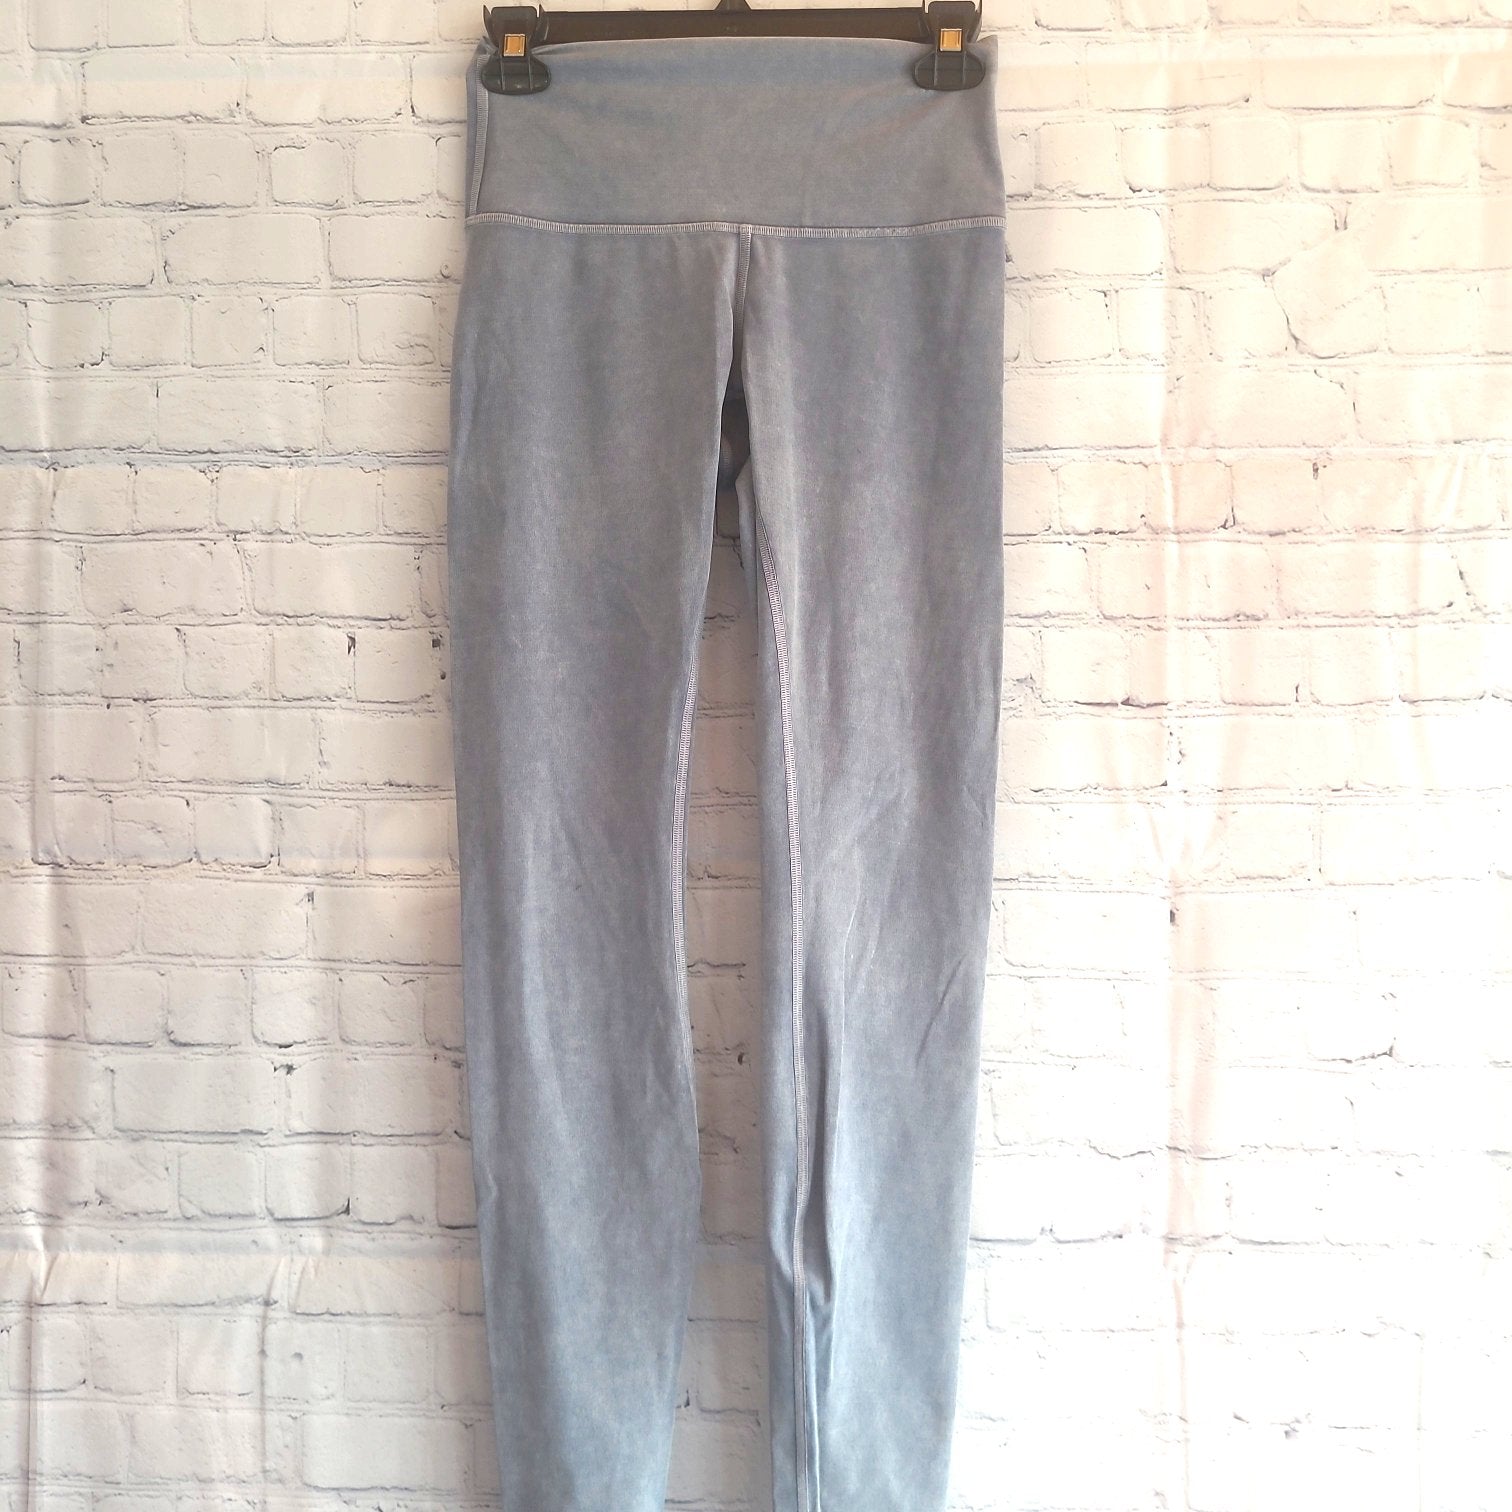 Lululemon Chambray Wunder Under 25” Leggings Blue Size 4 - $60 (38% Off  Retail) - From Taylor